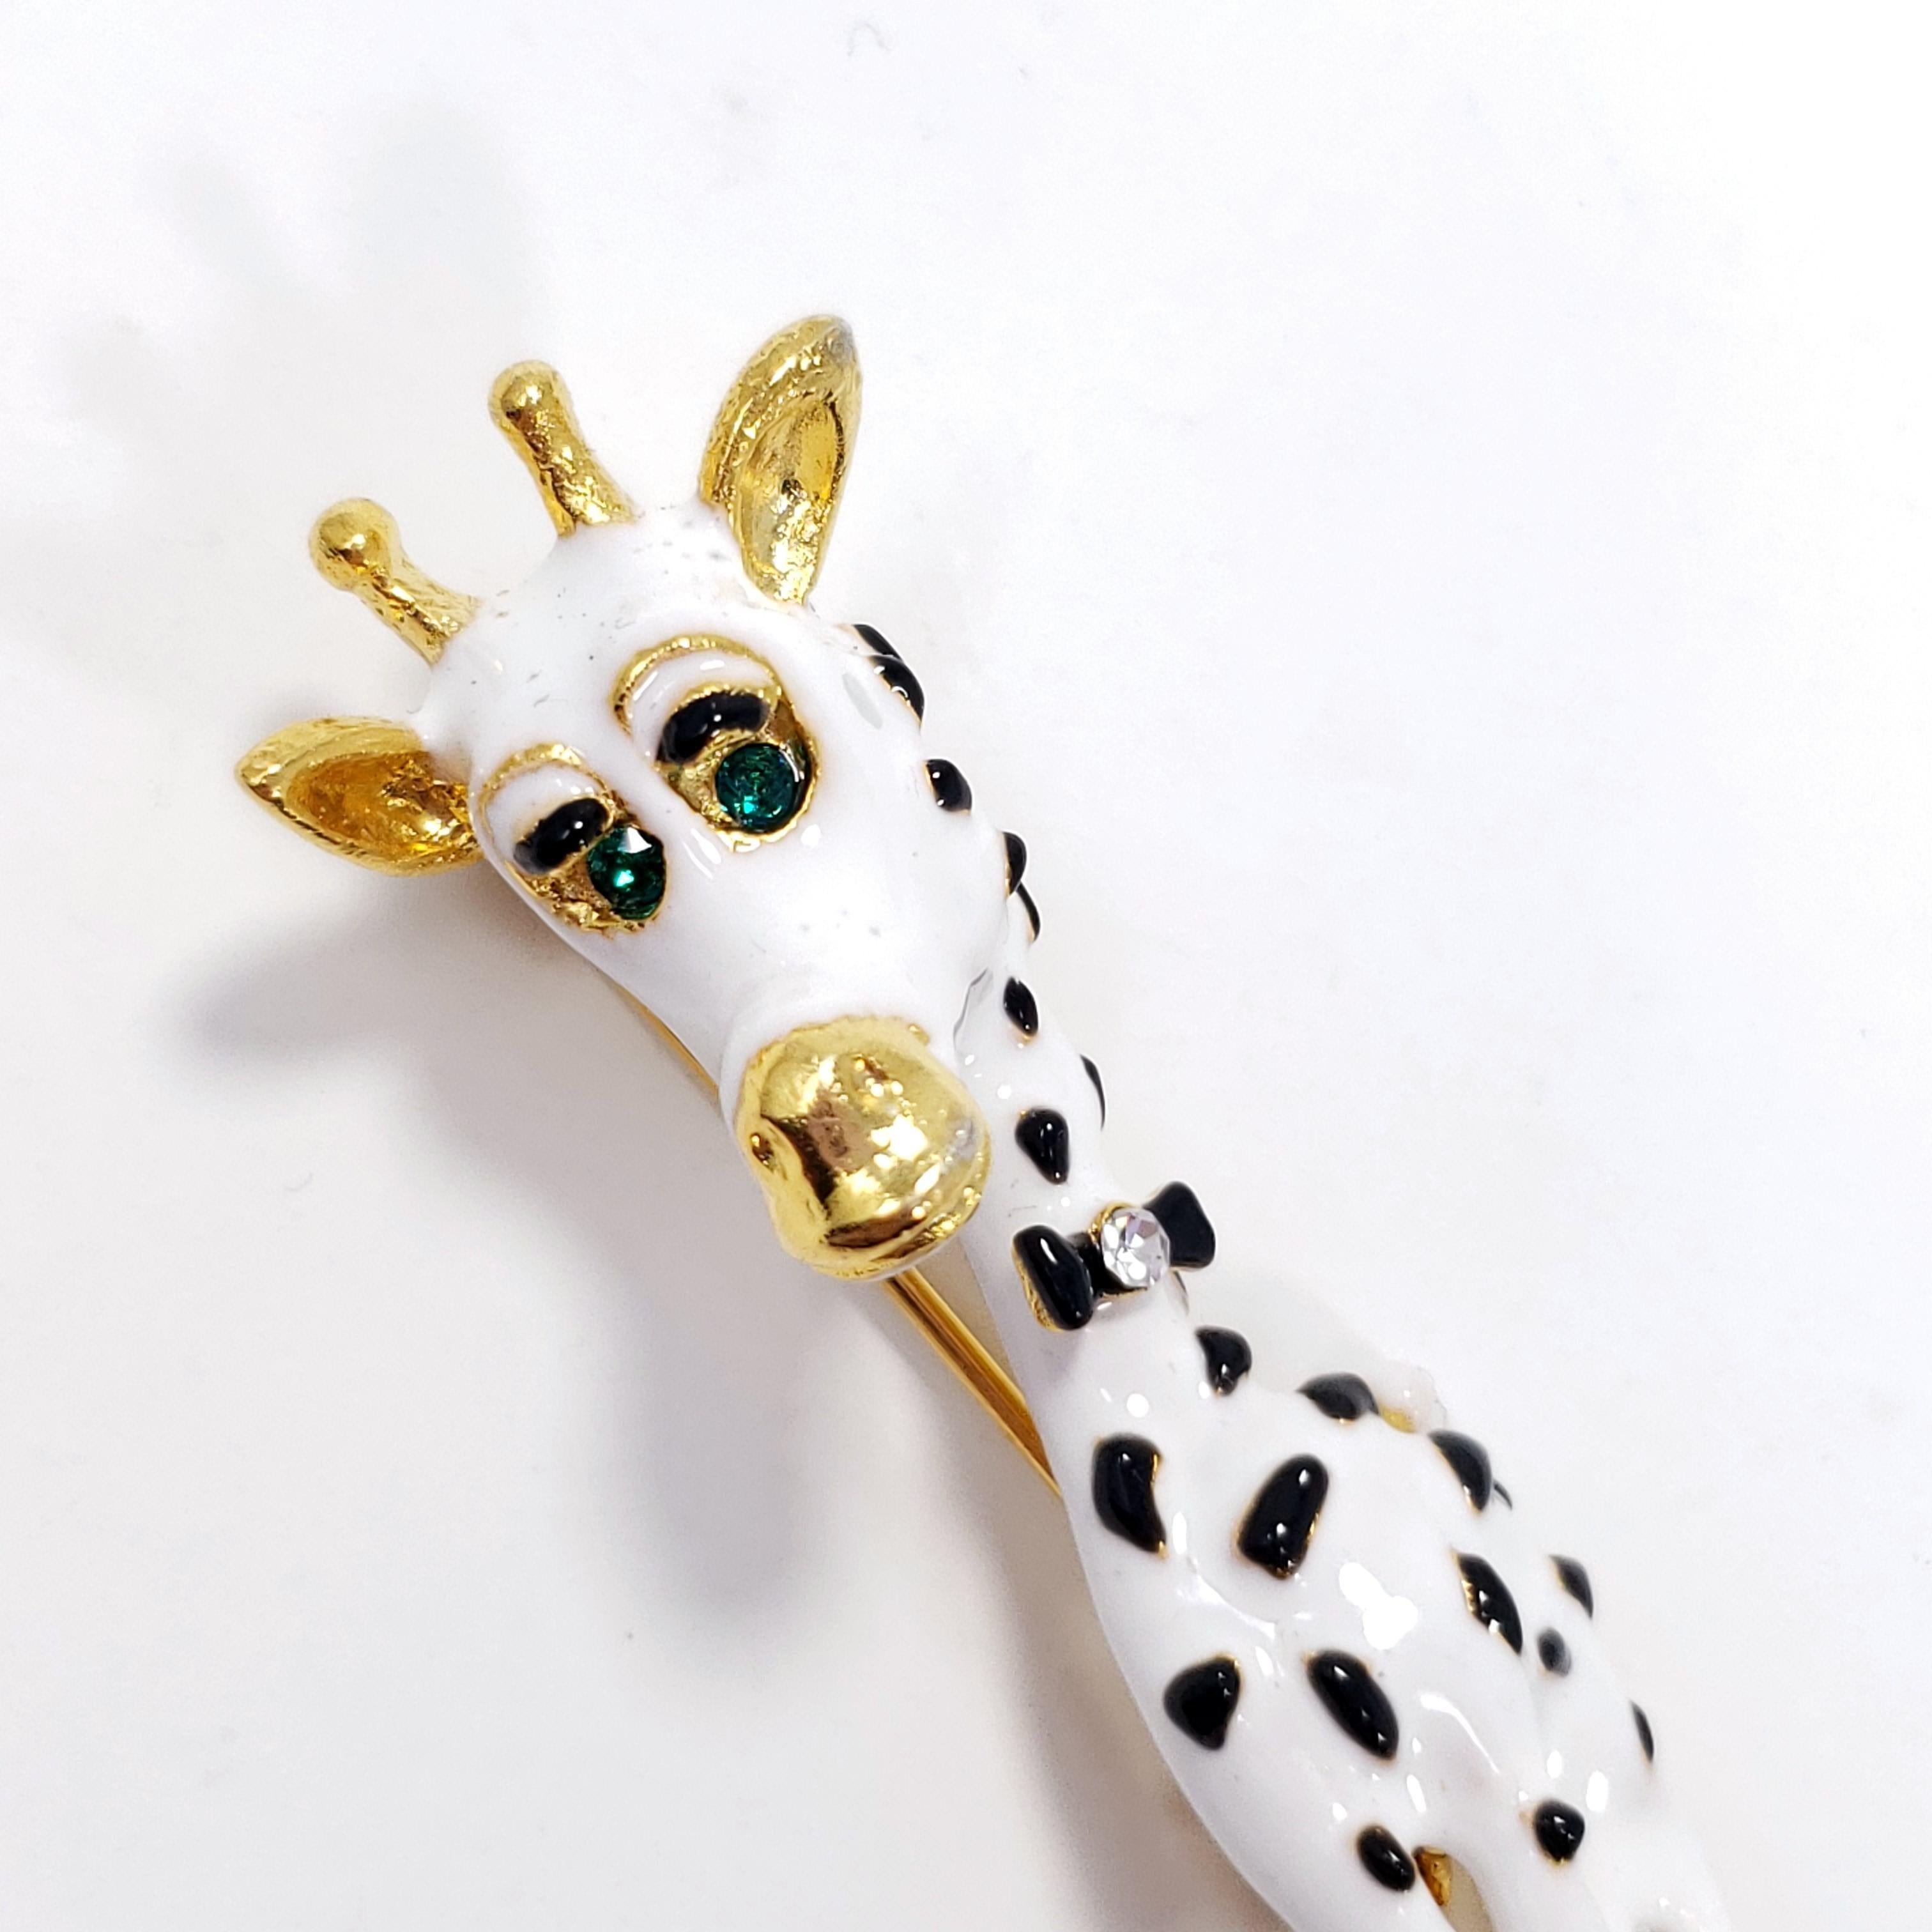 Whimsical giraffe pin Kenneth Jay Lane. This stylish black and white giraffe is wearing a crystal-accented bow tie, dressed for any classy occasion!

Vintage 90s collector's costume jewelry pin, wonderfully preserved and never worn.

Hallmarks,